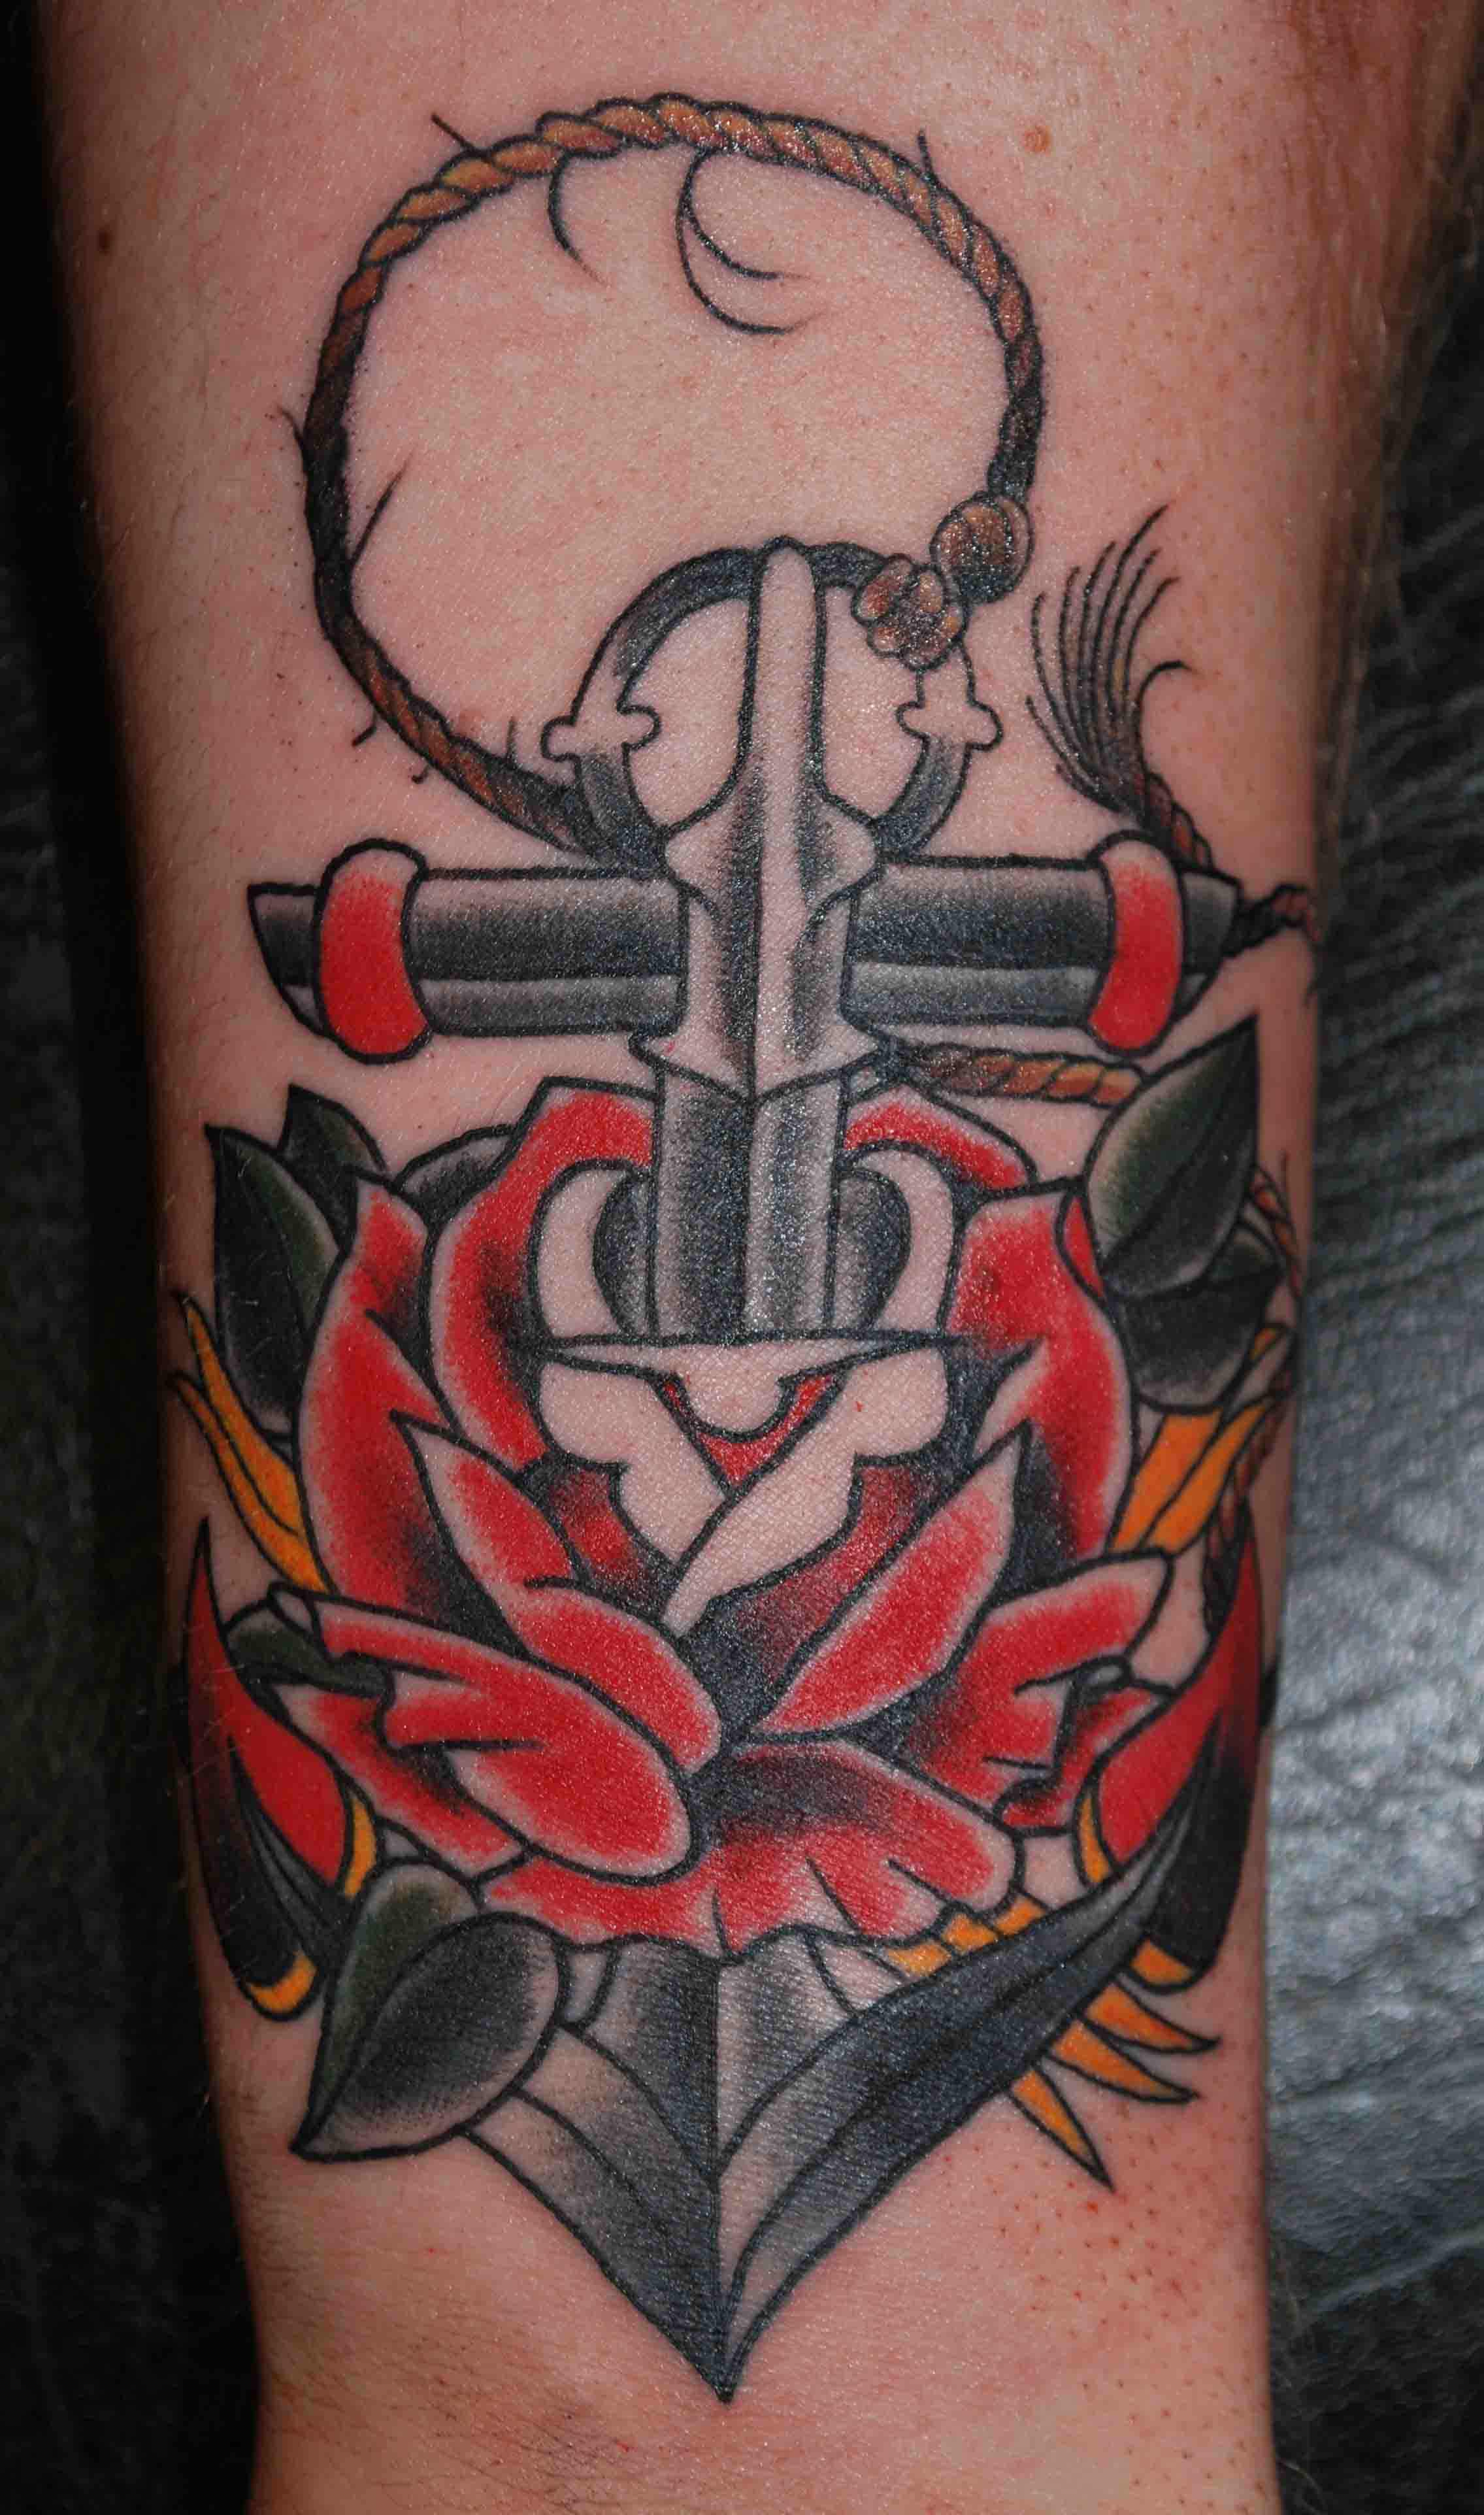 Traditional Anchor In Rose Tattoo Design For Forearm